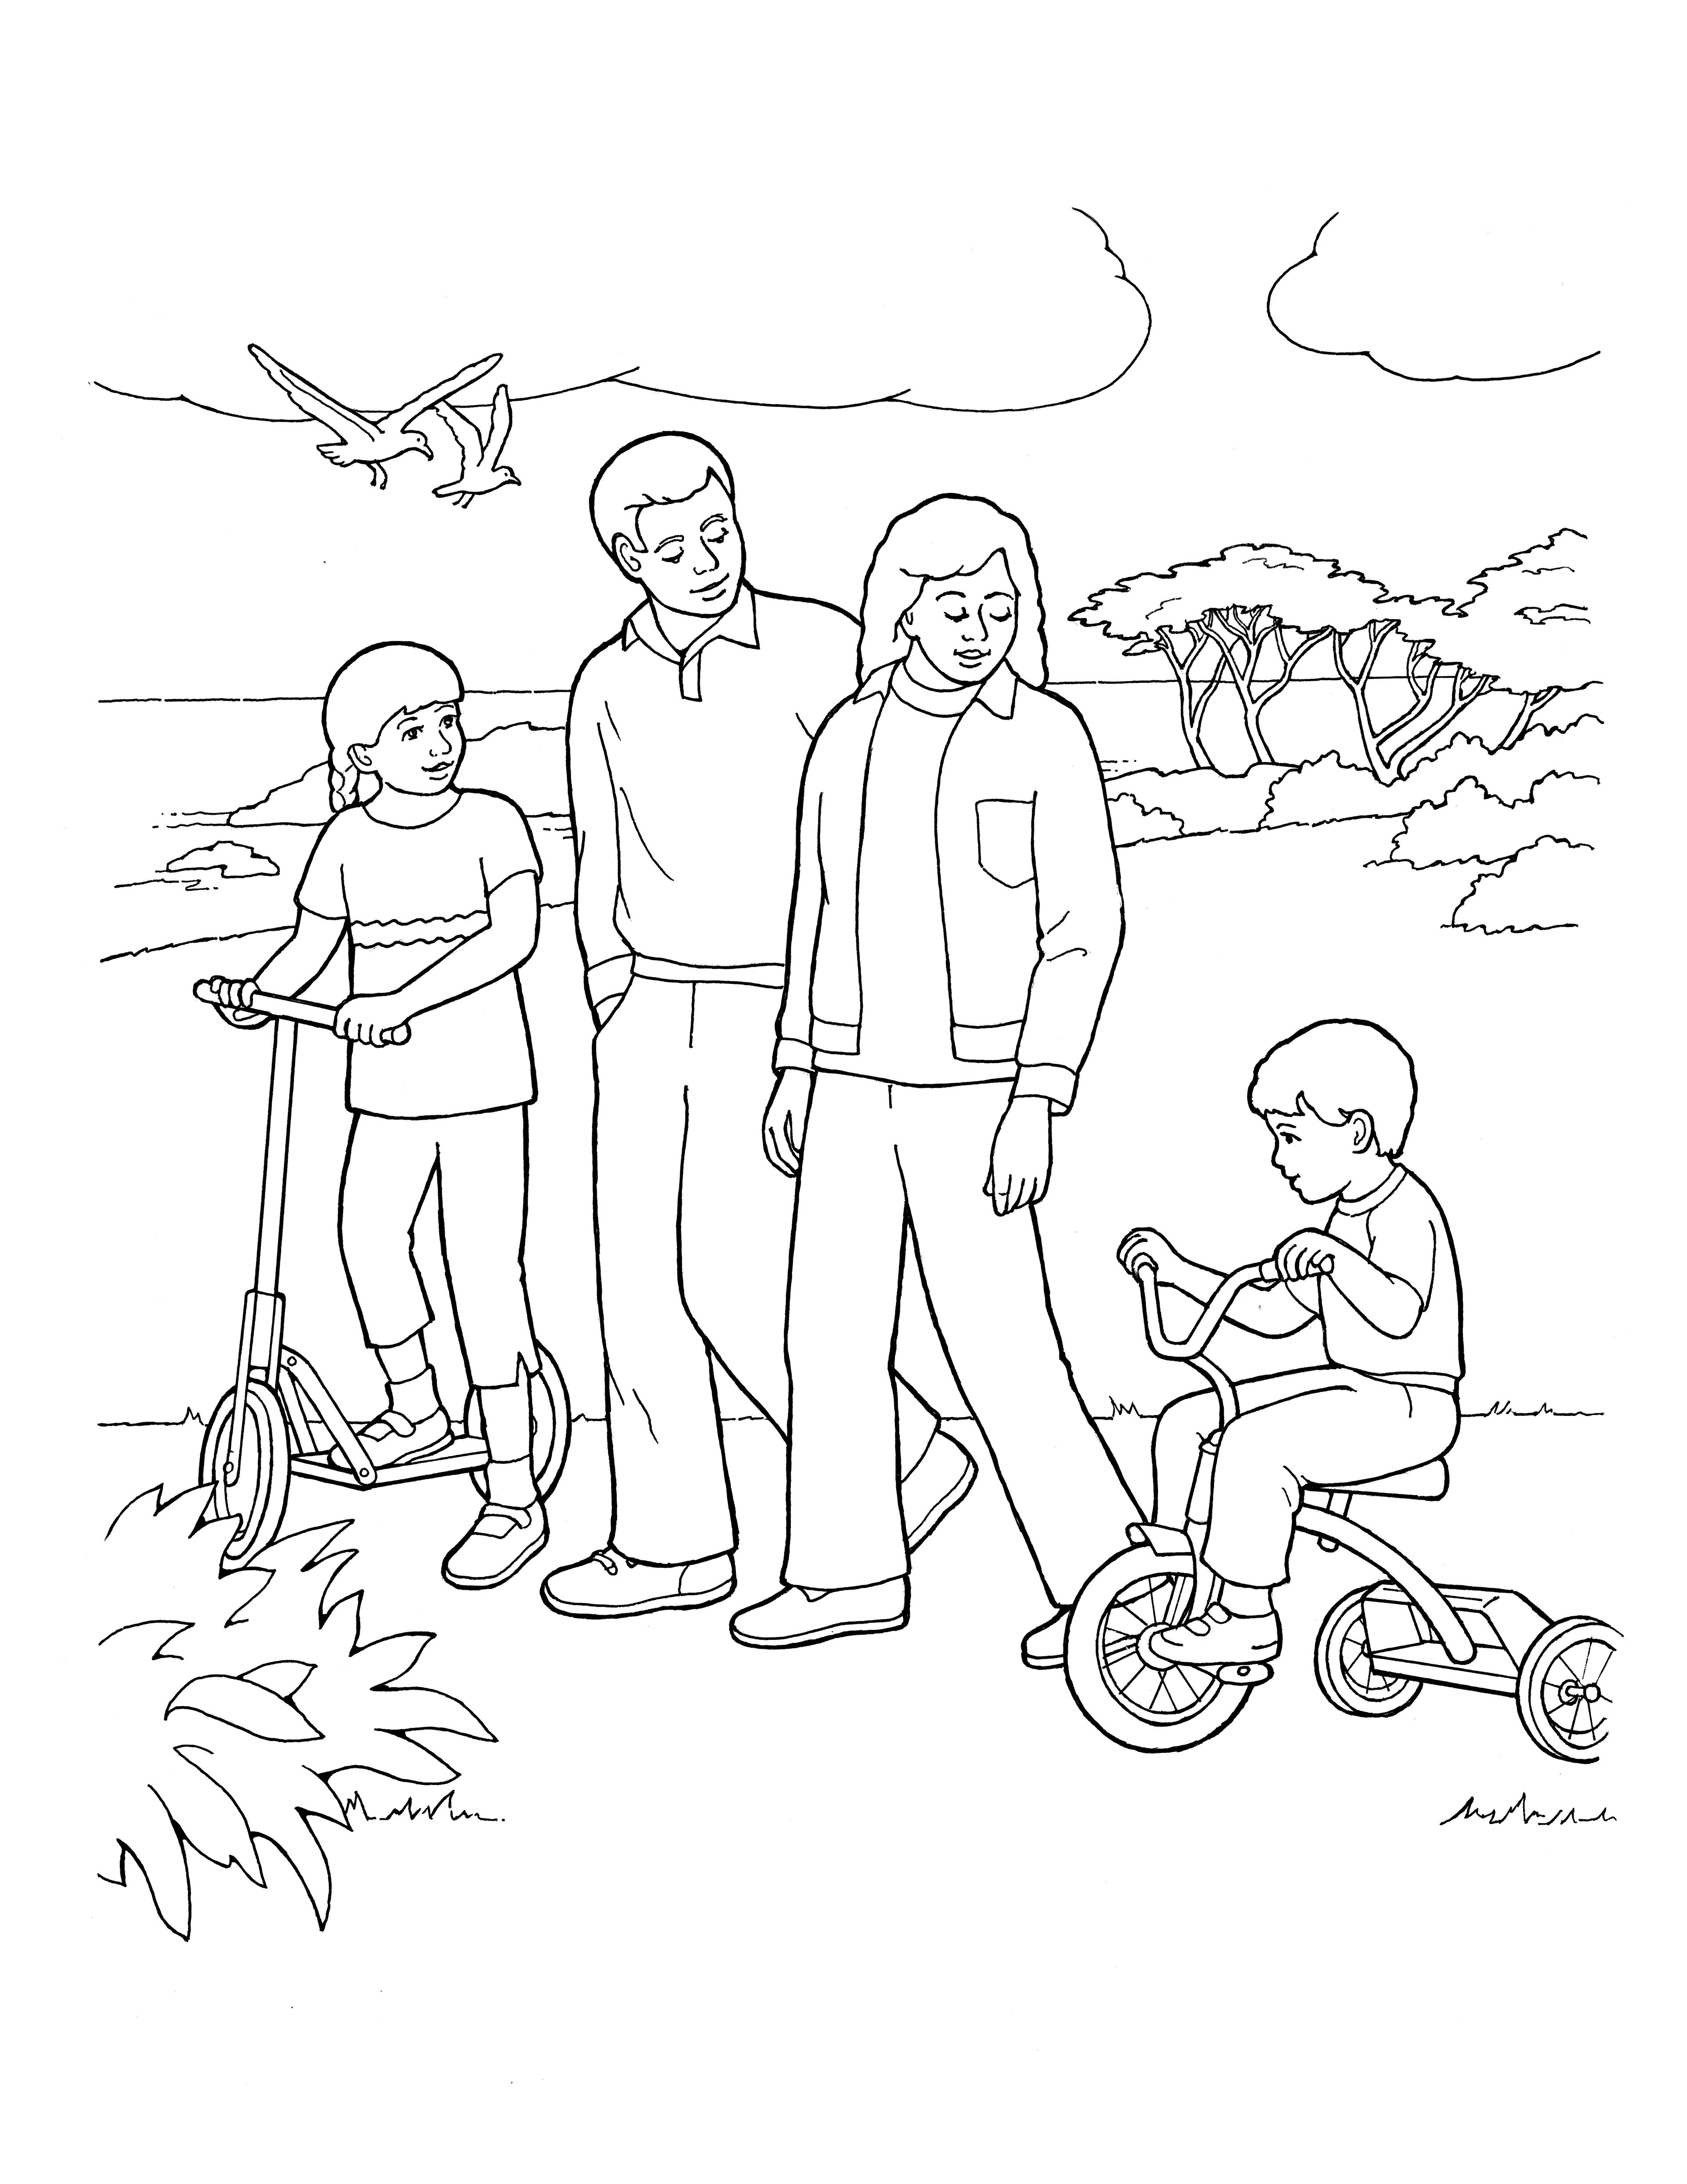 An illustration of a family of four walking and riding bikes and scooters.